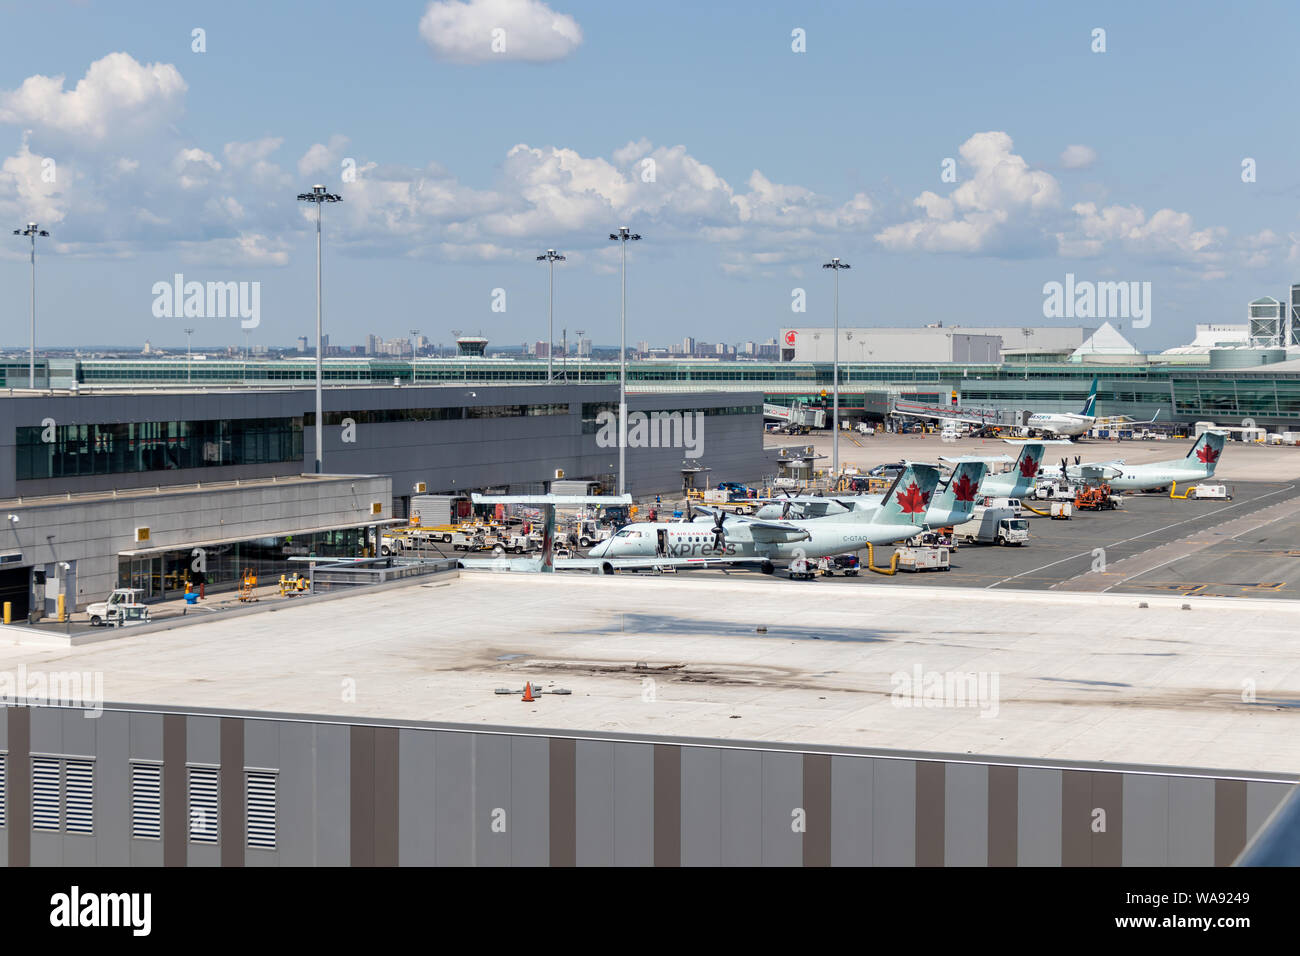 Air Canada and WestJet aircraft parked at gates at Toronto Pearson International Airport. Stock Photo